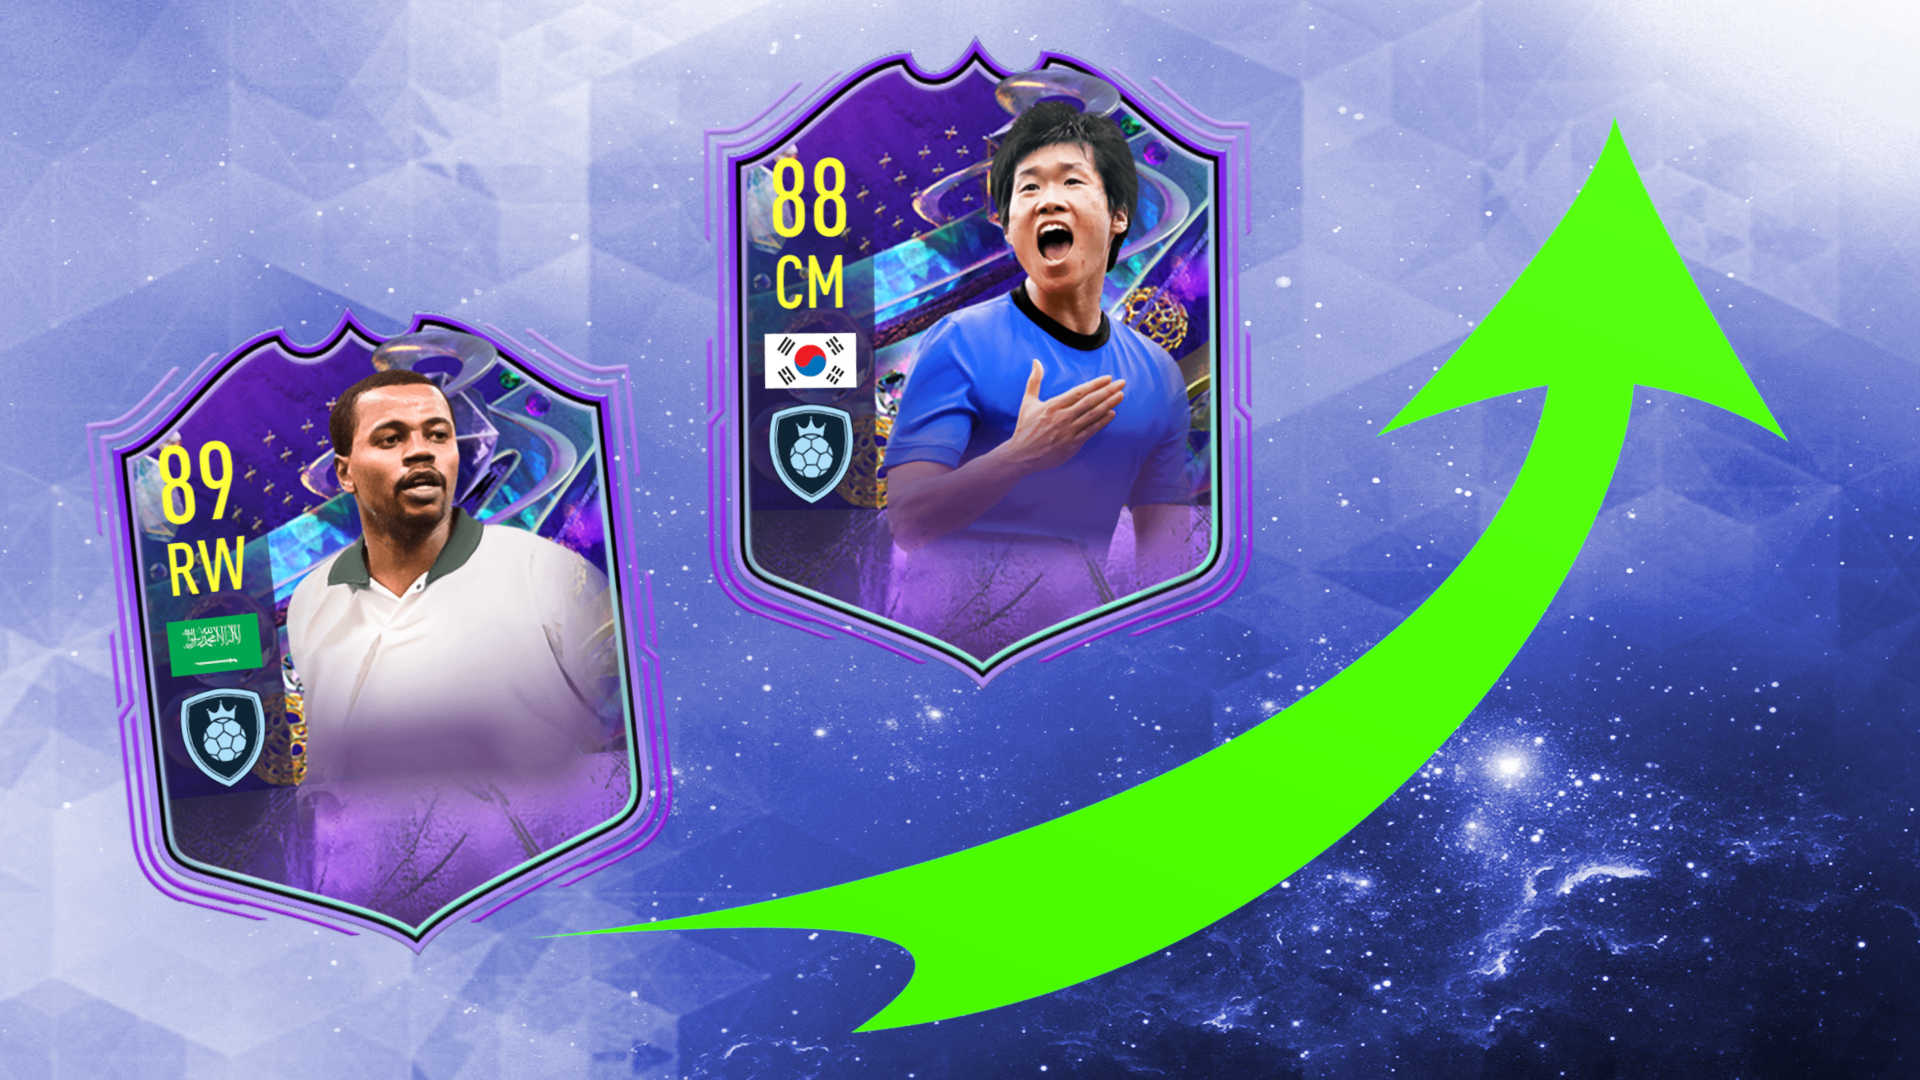 FIFA 23: Four Fantasy FUT Heroes will soon improve its stats and some remain undefeated